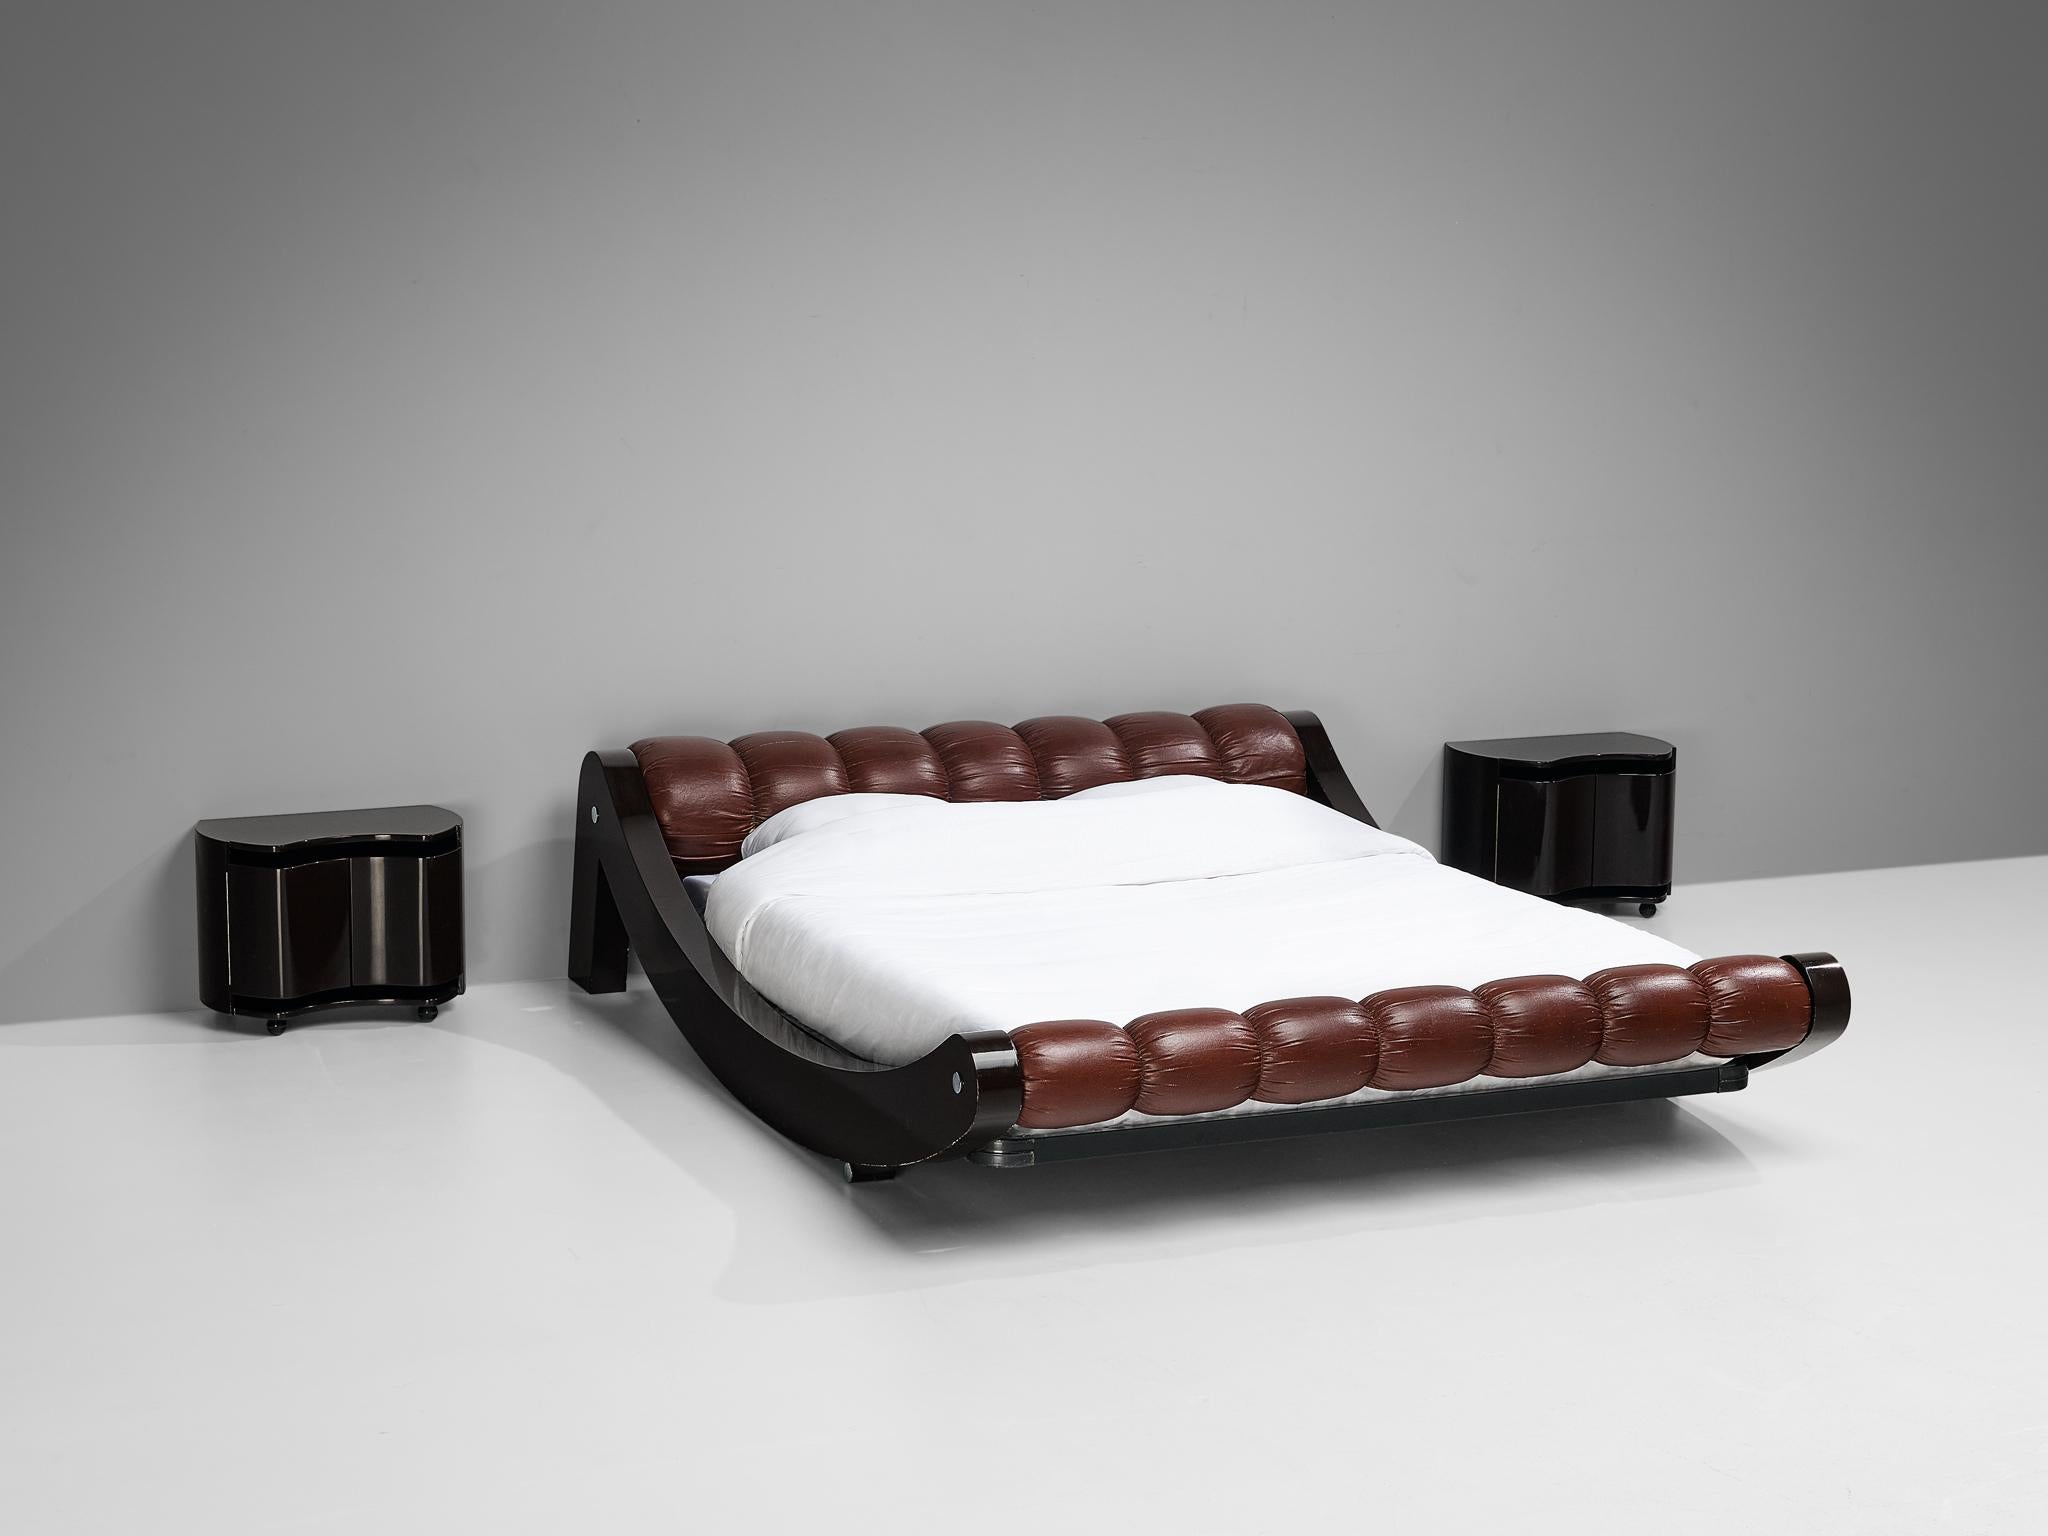 Benatti, 'Boomerang' queen bed, wood, lacquered wood, leather, Italy, design 1972

Rare and monumental Italian double bed made in the 1970s. This 'Boomerang' bed made by manufacturer Benatti and shows all characteristics of design in the post-modern